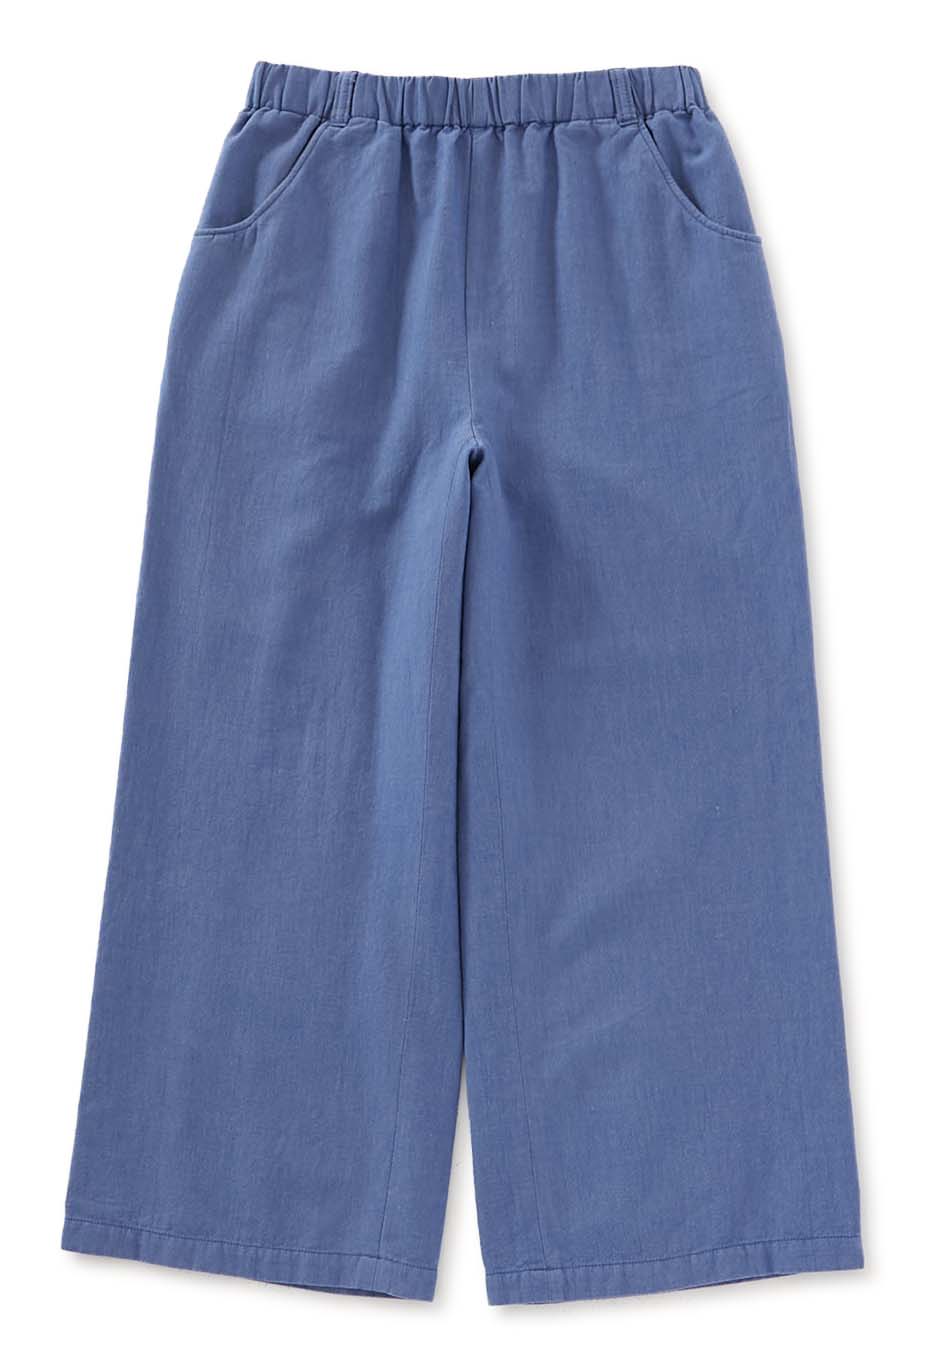 Paper Cotton Twill Dungaree Relaxed wide pants Women's